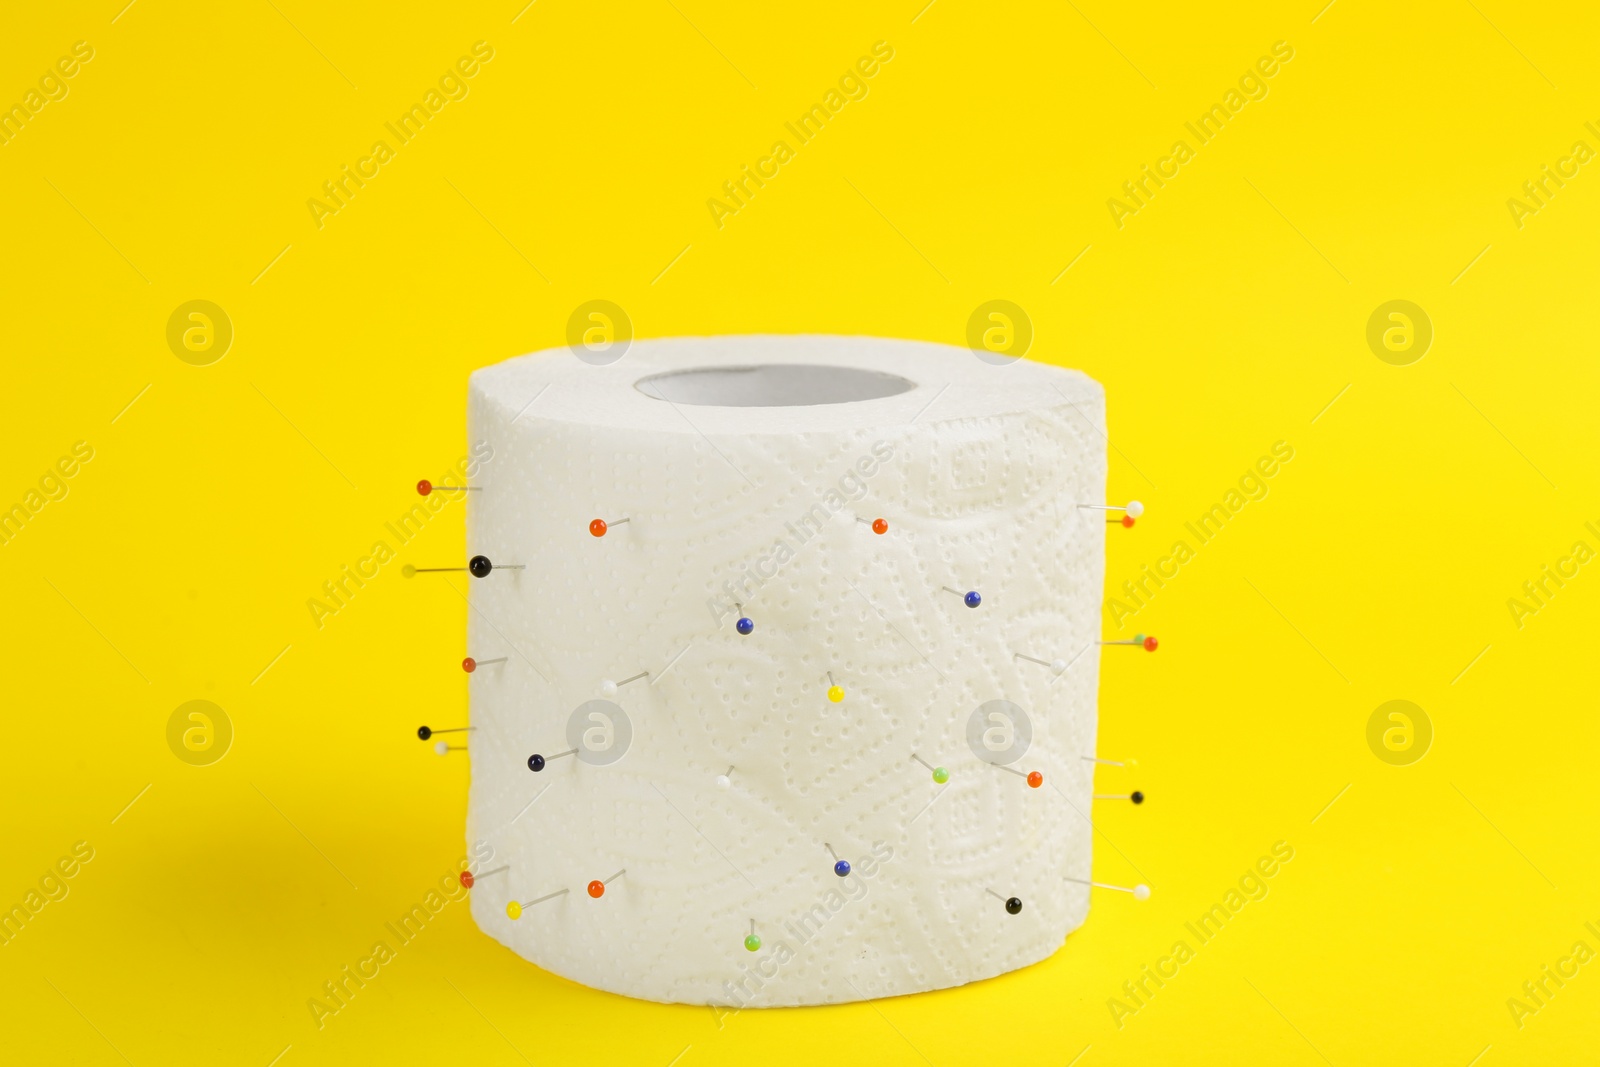 Photo of Roll of toilet paper with straight pins on yellow background. Hemorrhoid problems